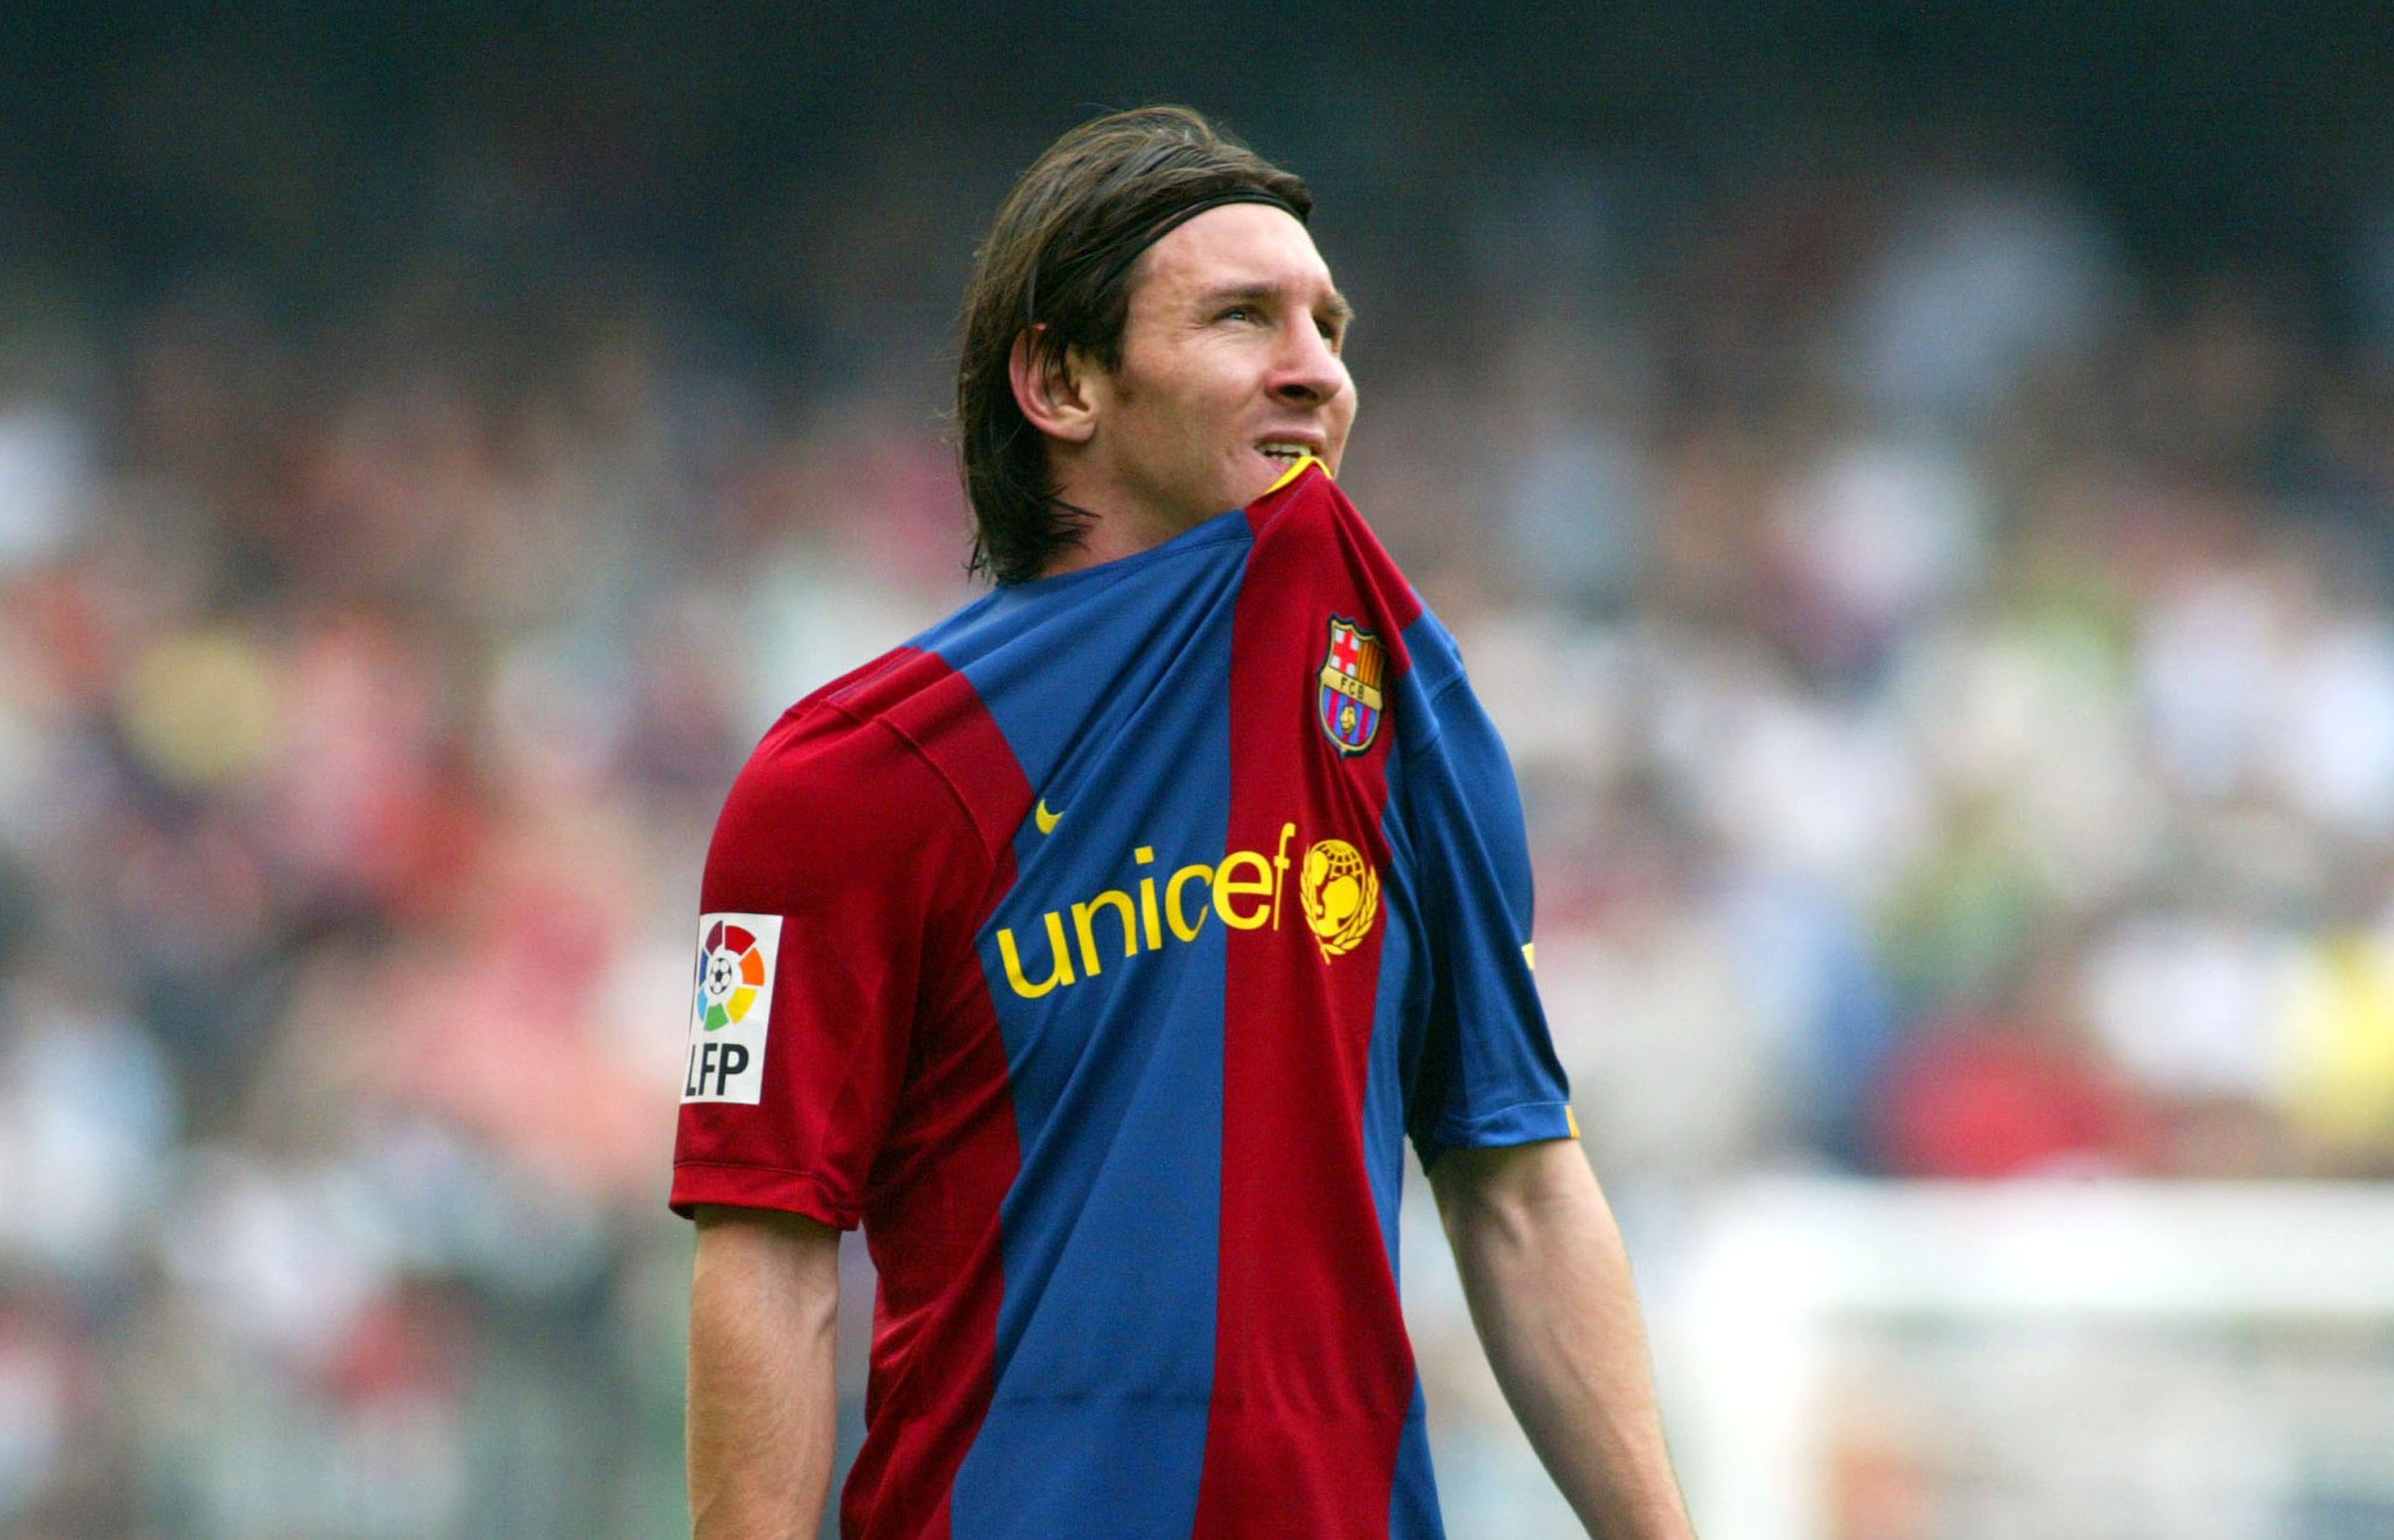 Lionel Messi's Possible Exit from Barça: A Look at His Past & Future